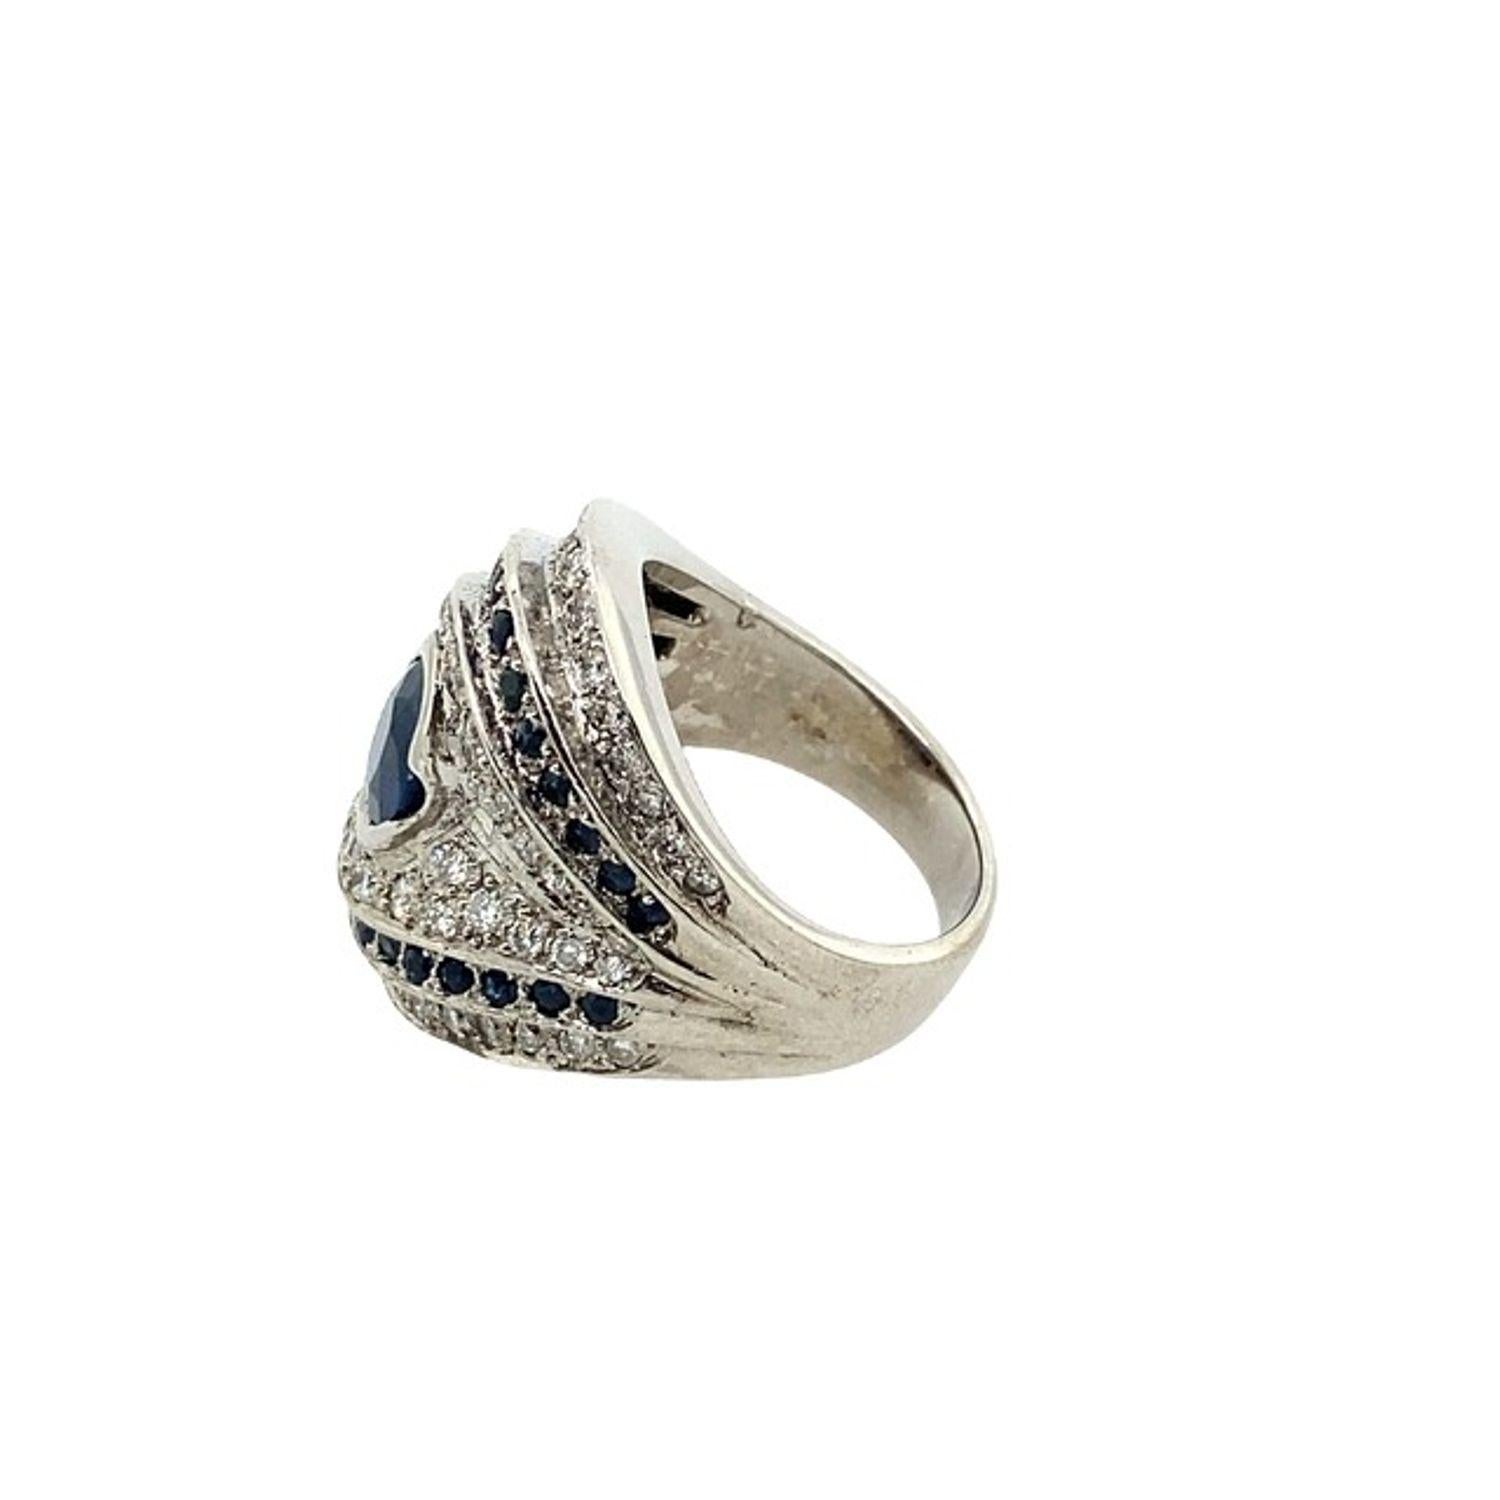 18ct White Gold Fine Quality 0.75ct Oval Sapphire Ring Surrounded by Diamonds

Additional Information:
Total Diamond Weight: 1.0ct
 Diamond Colour: F/G
 Diamond Clarity: VS2
Total Sapphire Weight: 1.25ct (0.75ct Oval + 0.50ct Small Round)
Total